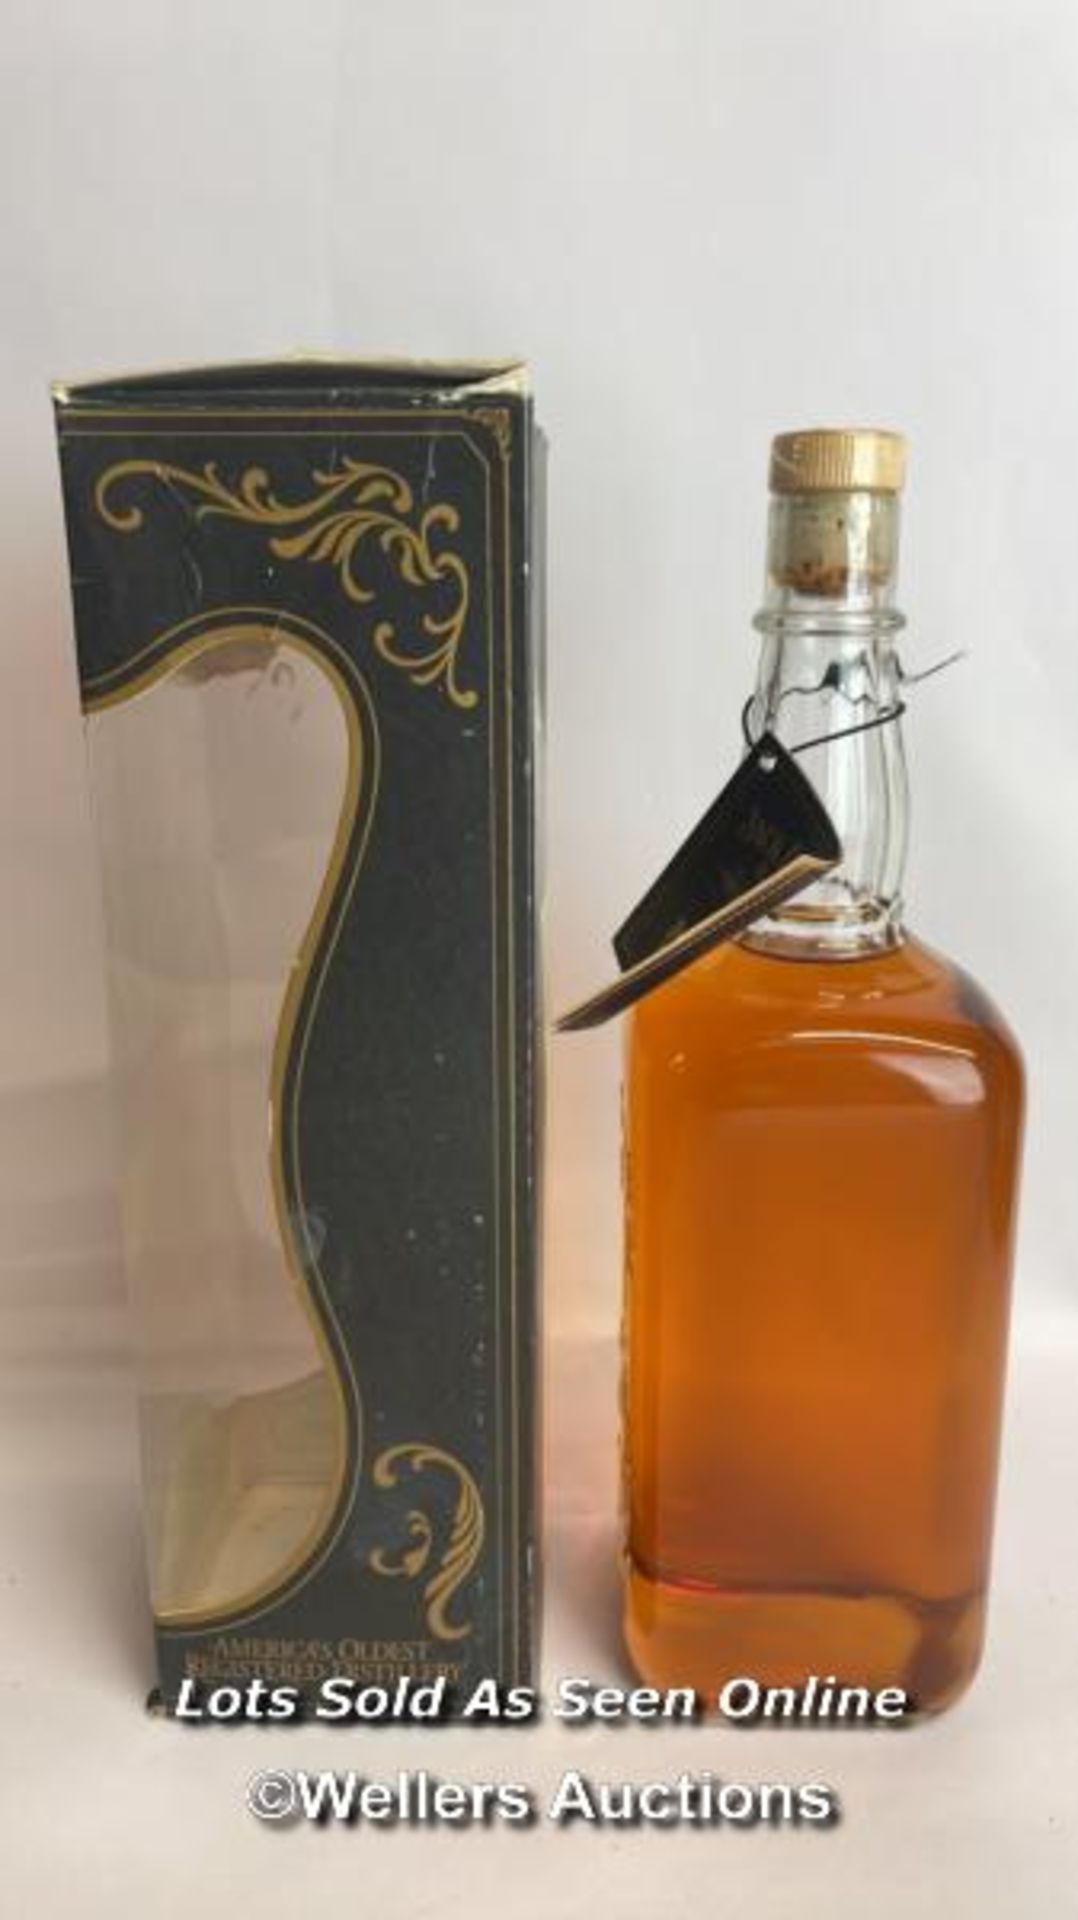 1895 Jack Daniels Replica Bottle, Old No.7 Brand, Old Time Tennessee Whiskey, 1L, 43% vol / Please - Image 4 of 7